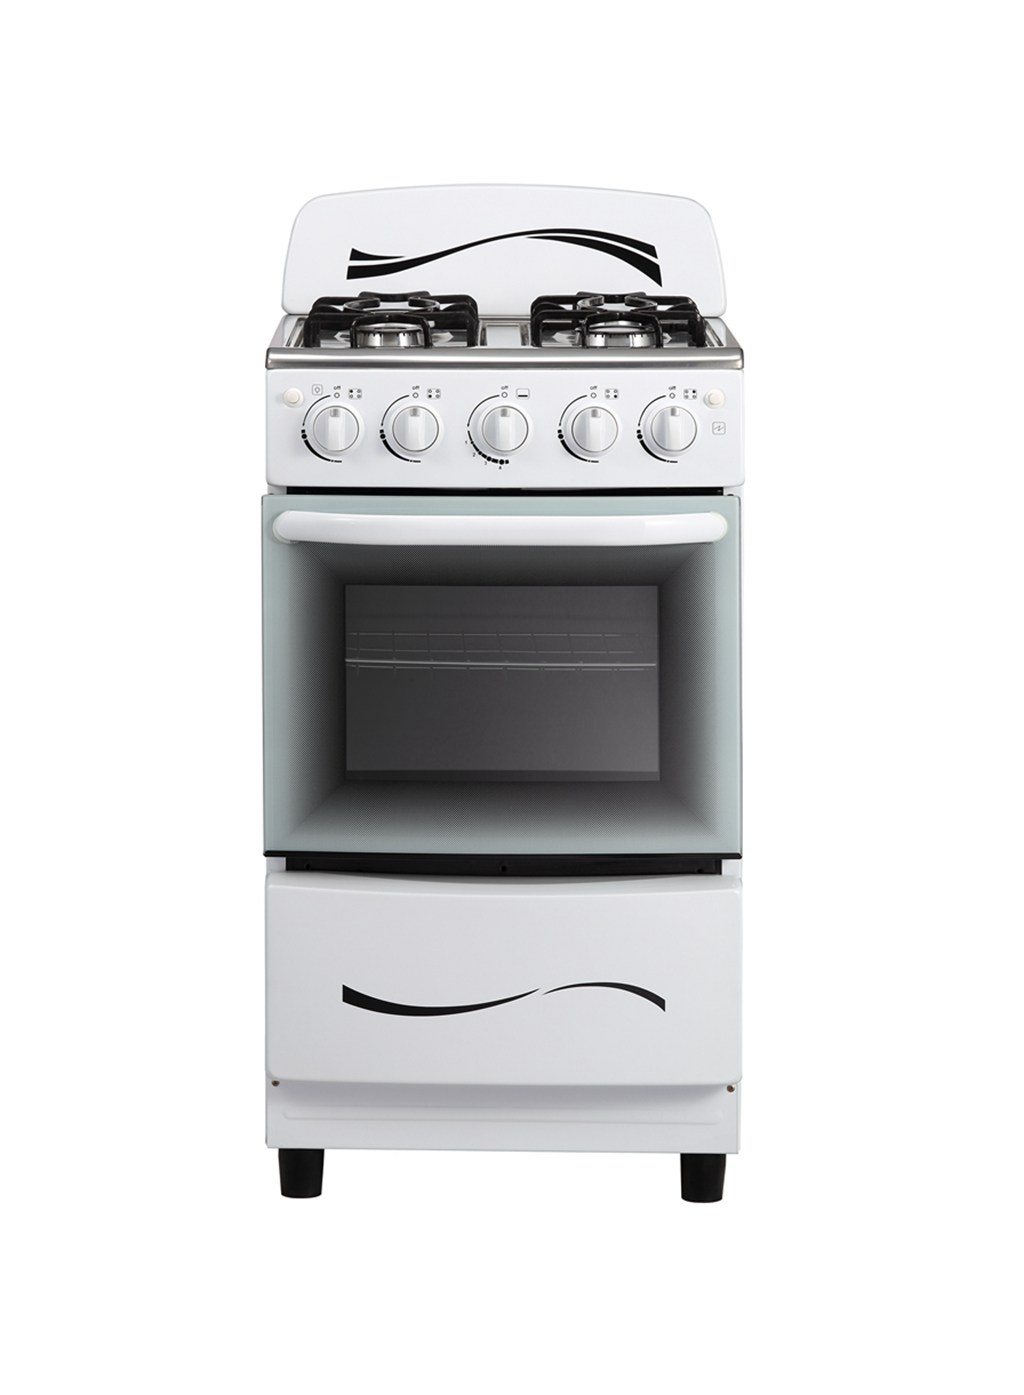 20 Inches Wide Stainless Freestanding 4 Gas Burners Oven